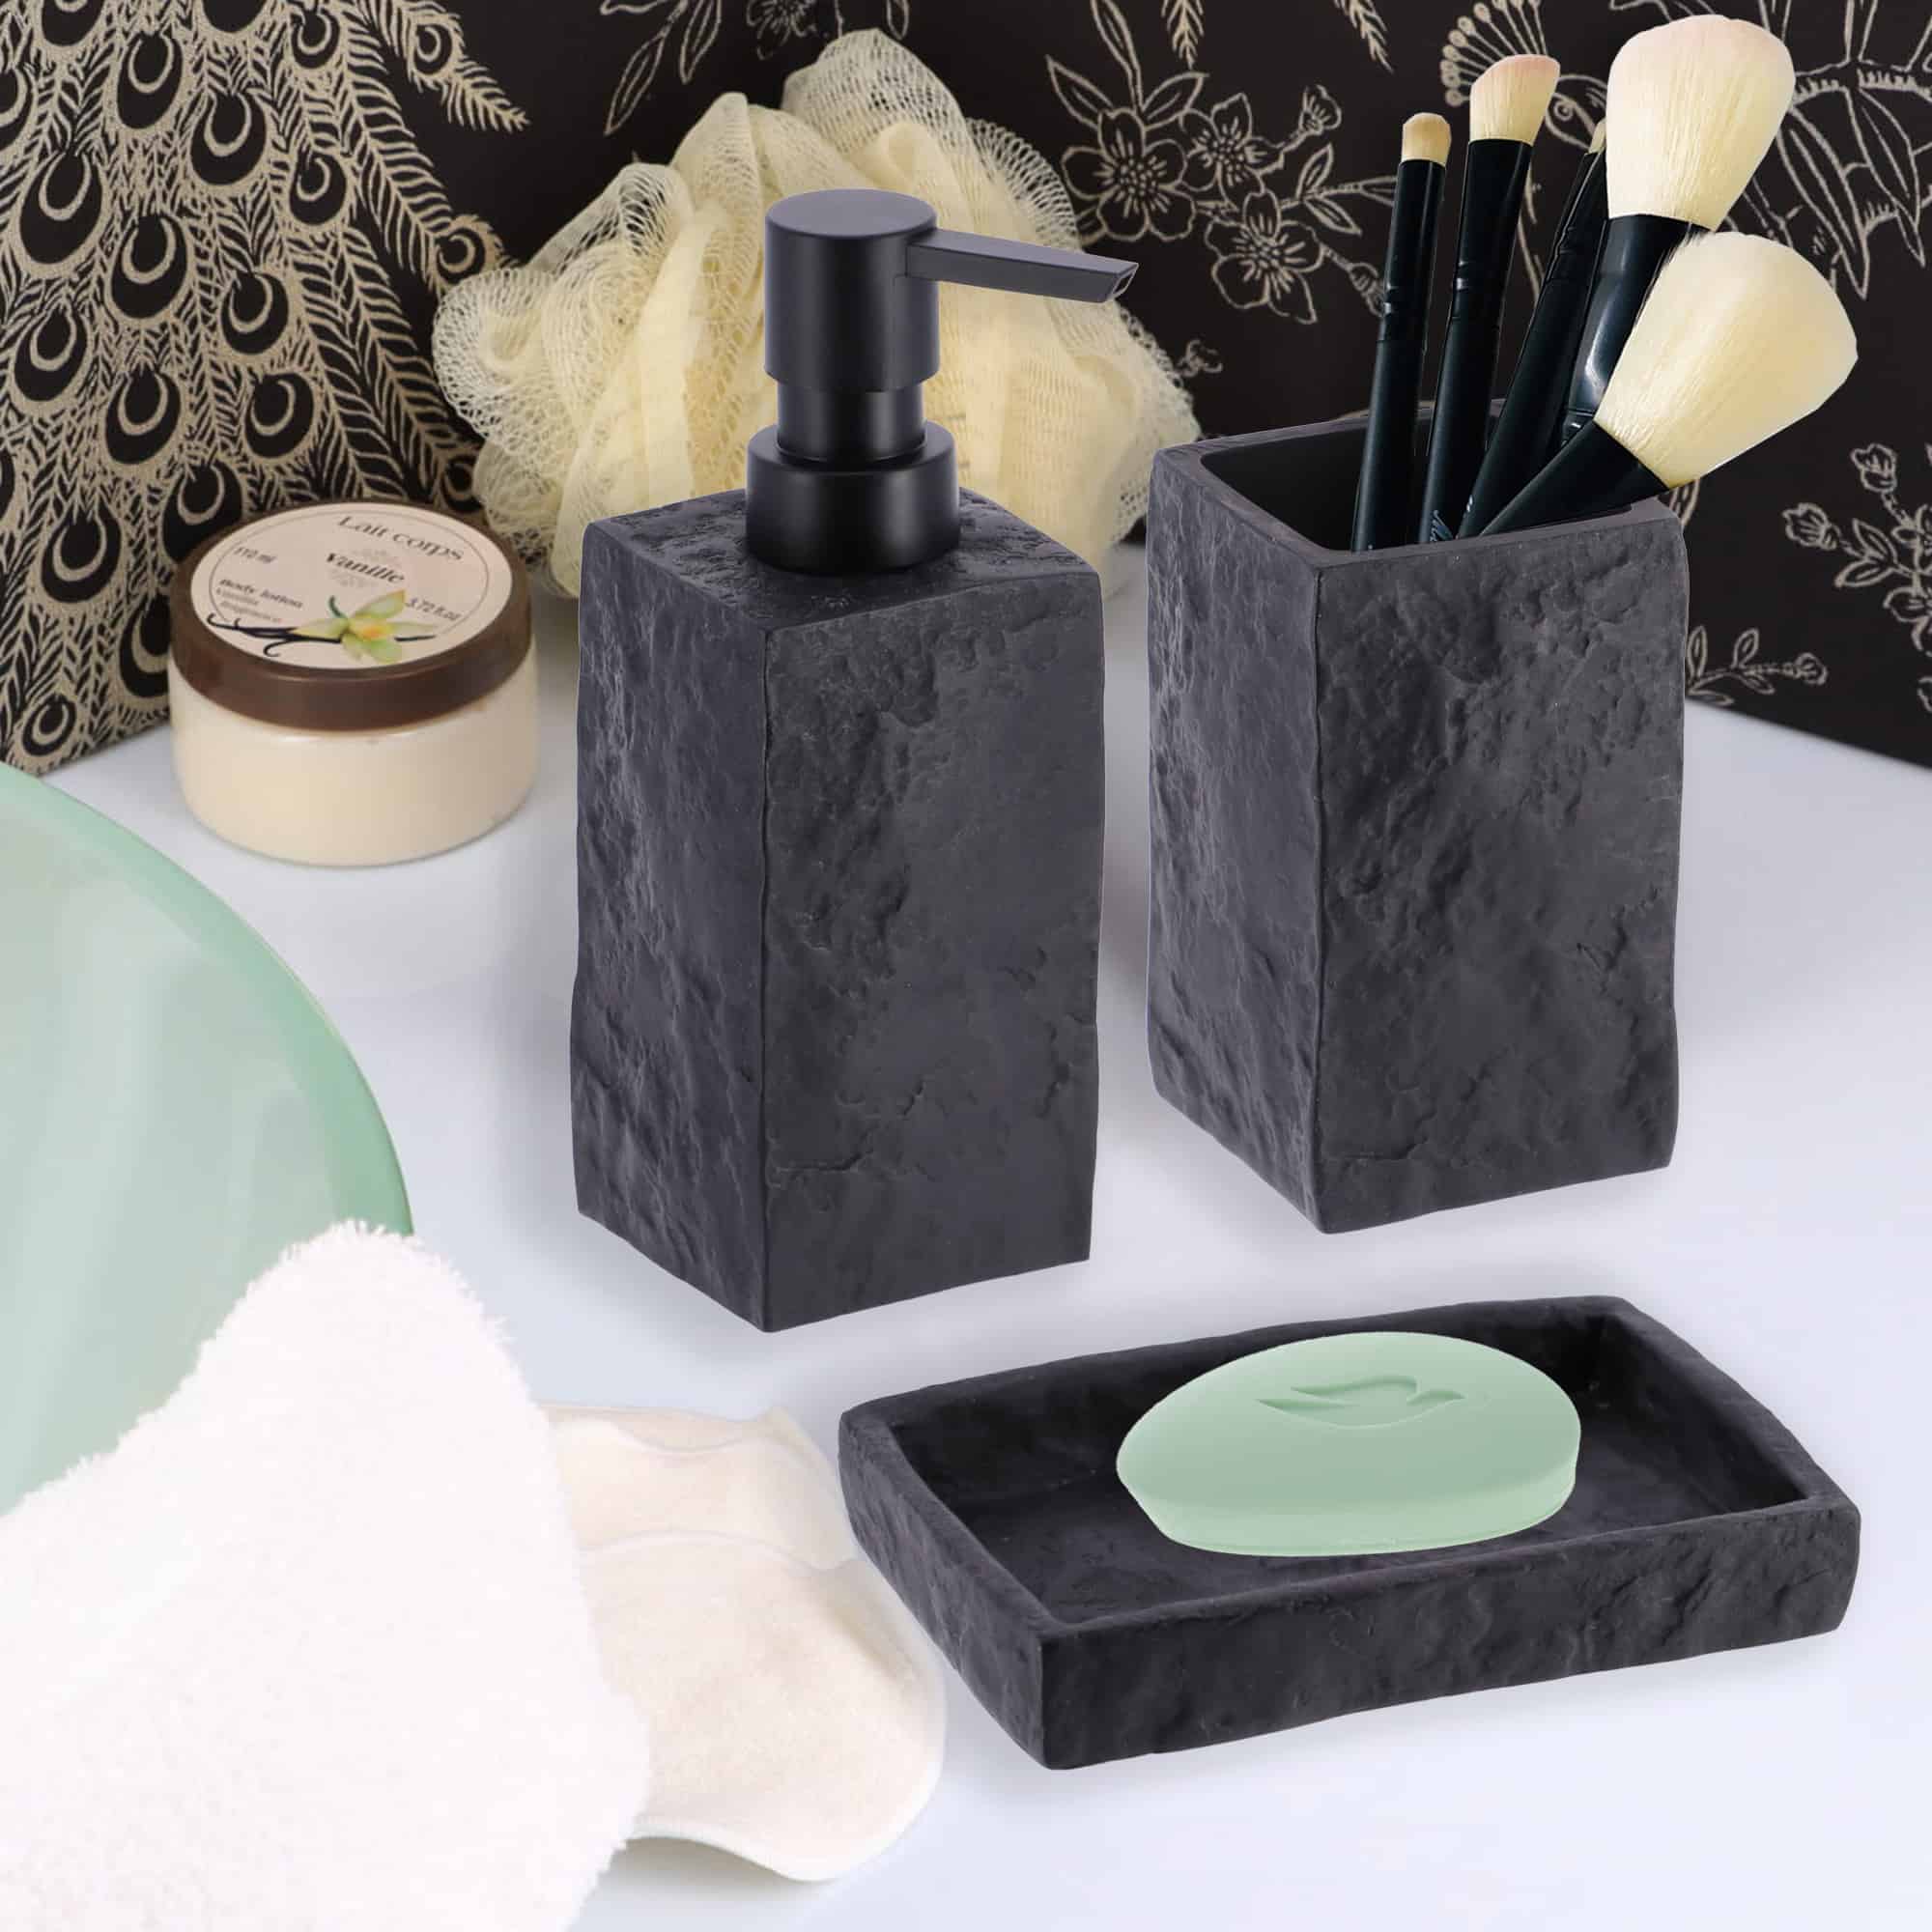 Black Stone Effect Soap Dish Holder Cup Dispenser Tray